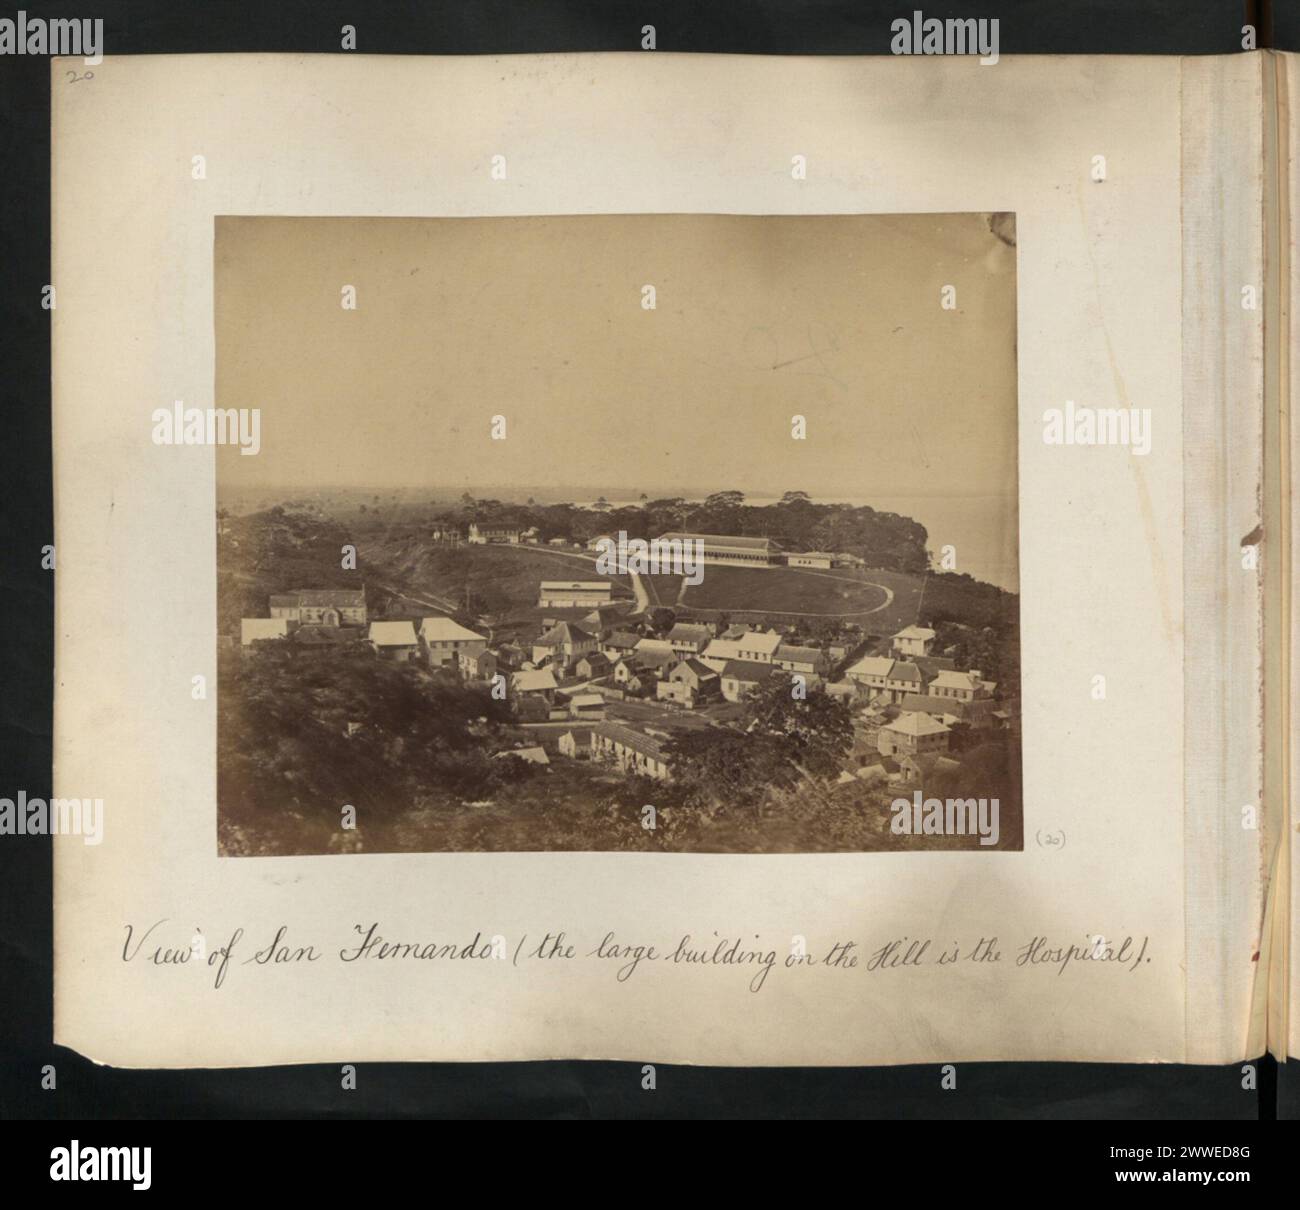 Description: View of San Hernando (the large building on the hill is the Hospital). Location: San Fernando, Trinidad and Tobago Date: 1870-1939 caribbean, caribbeanthroughalens Stock Photo